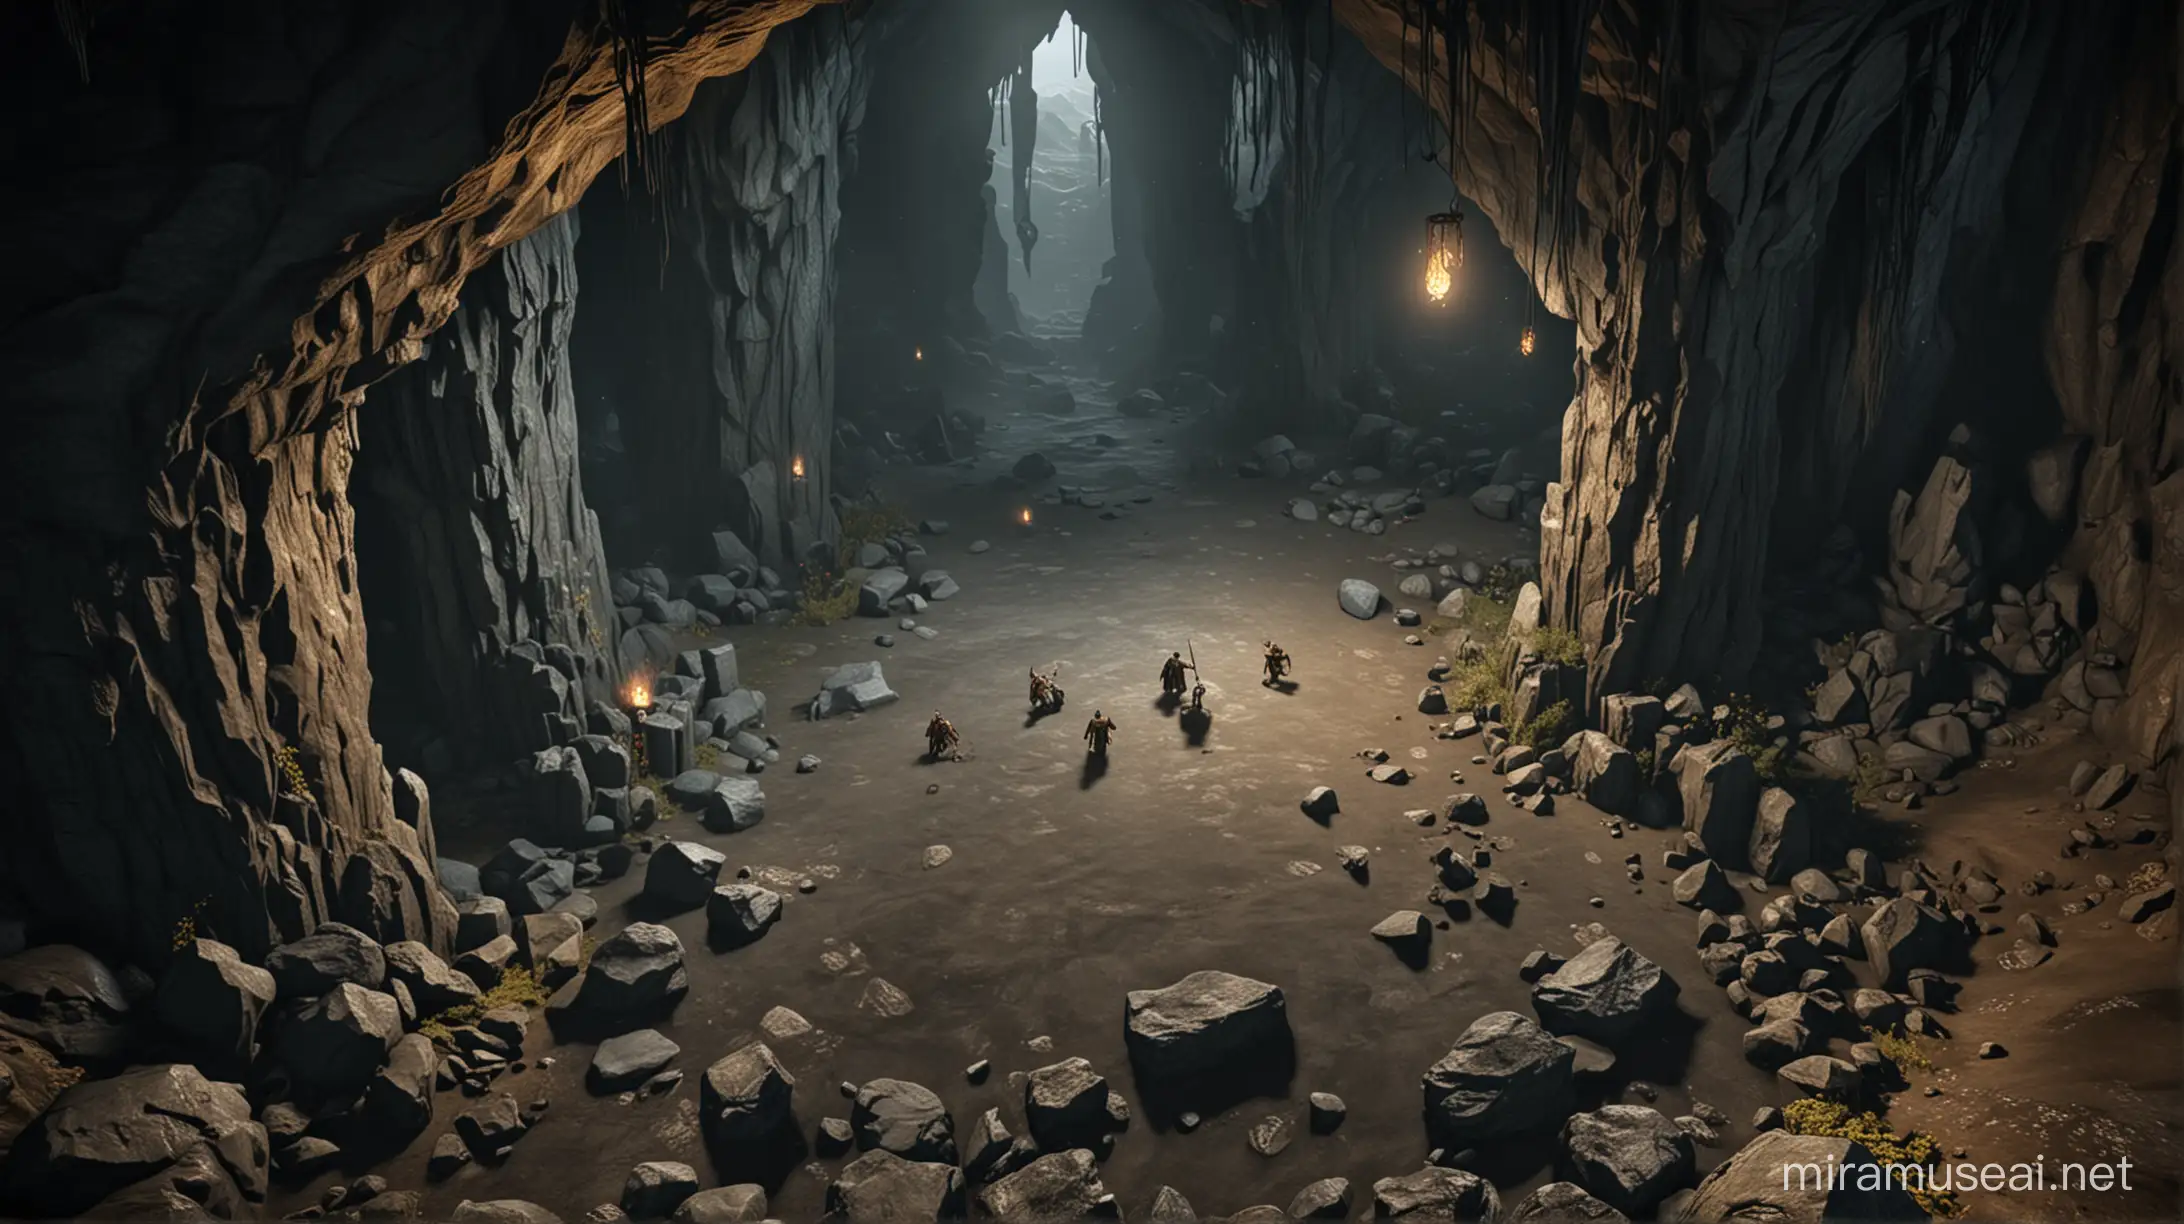 Top Down Lord of the Rings Video Game in a Spacious Cave with Pillars